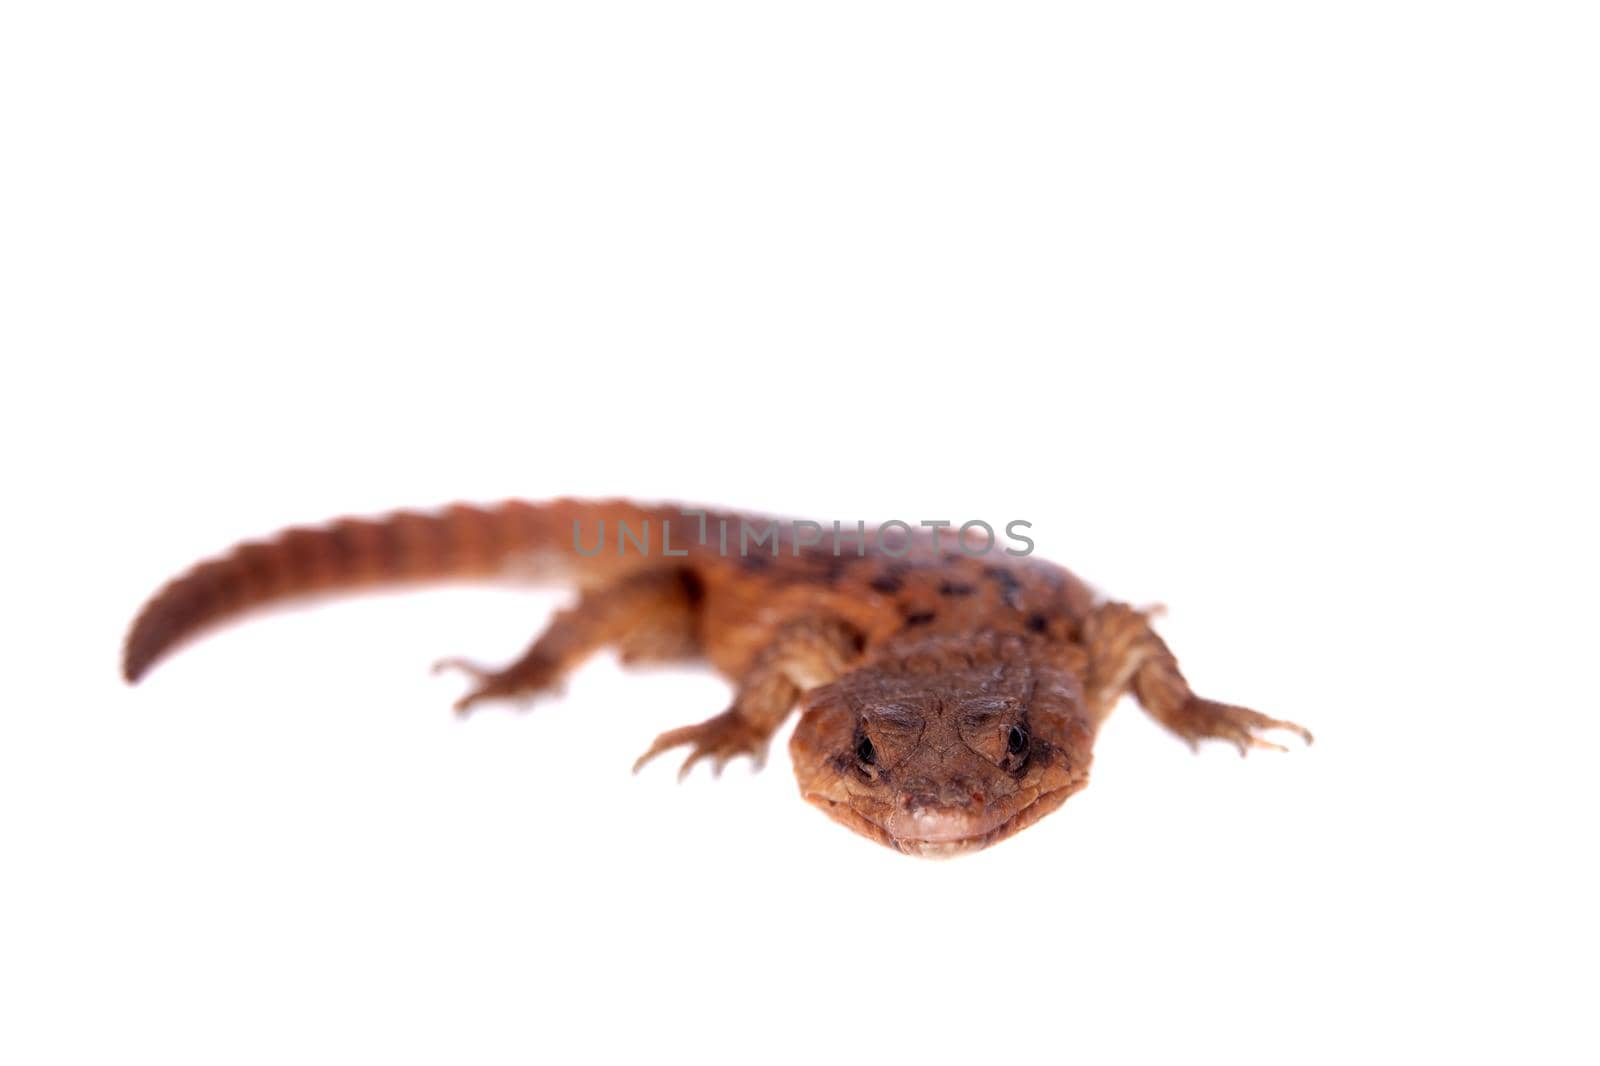 Transvaal Girdled Lizard on white background. by RosaJay